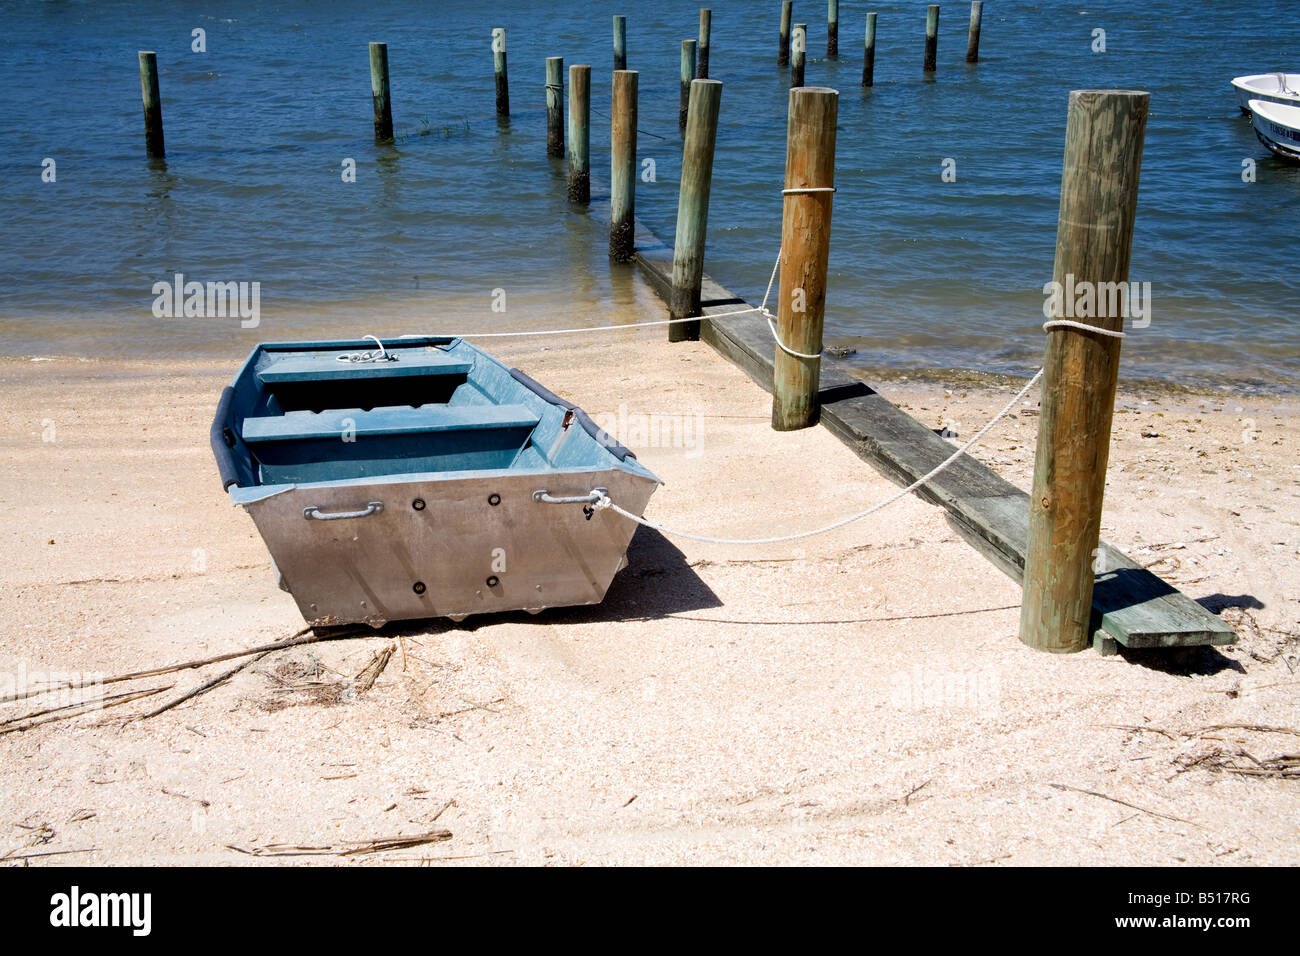 Boat by wooden pilings near a calm bay in St. Augustine, Florida Stock Photo